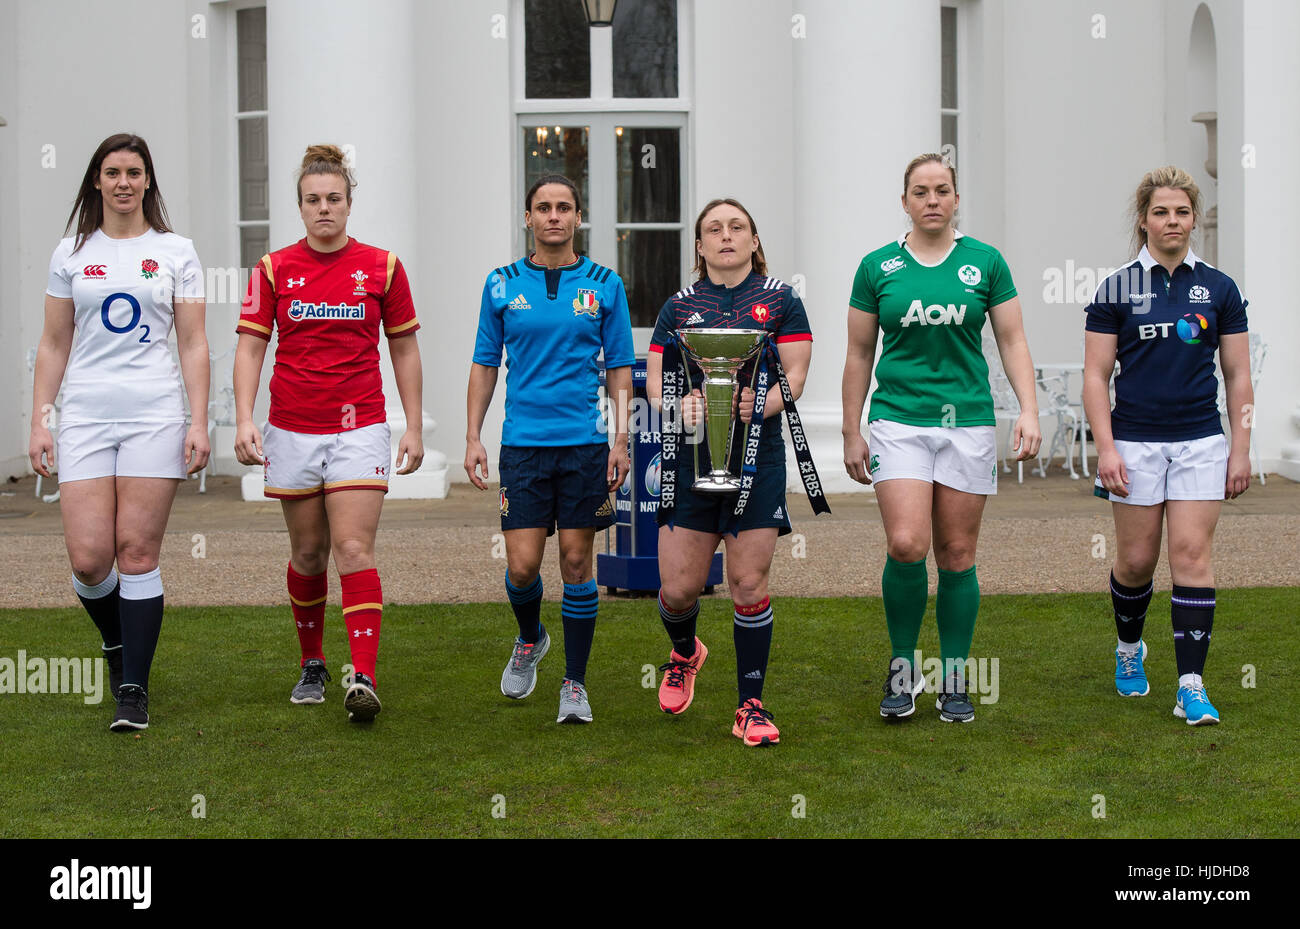 London, UK. 25th January 2017. Womens Captains, Sarah Hunter, Carys Phillips, Sara Barattin, Gaelle Mignot, Niamh Briggs and Lisa Martin with the 6 Nations trophy at the launch of the RBS 6 Nations Championship at the Hurlingham Club London Credit: Alan D West/Alamy Live News Stock Photo